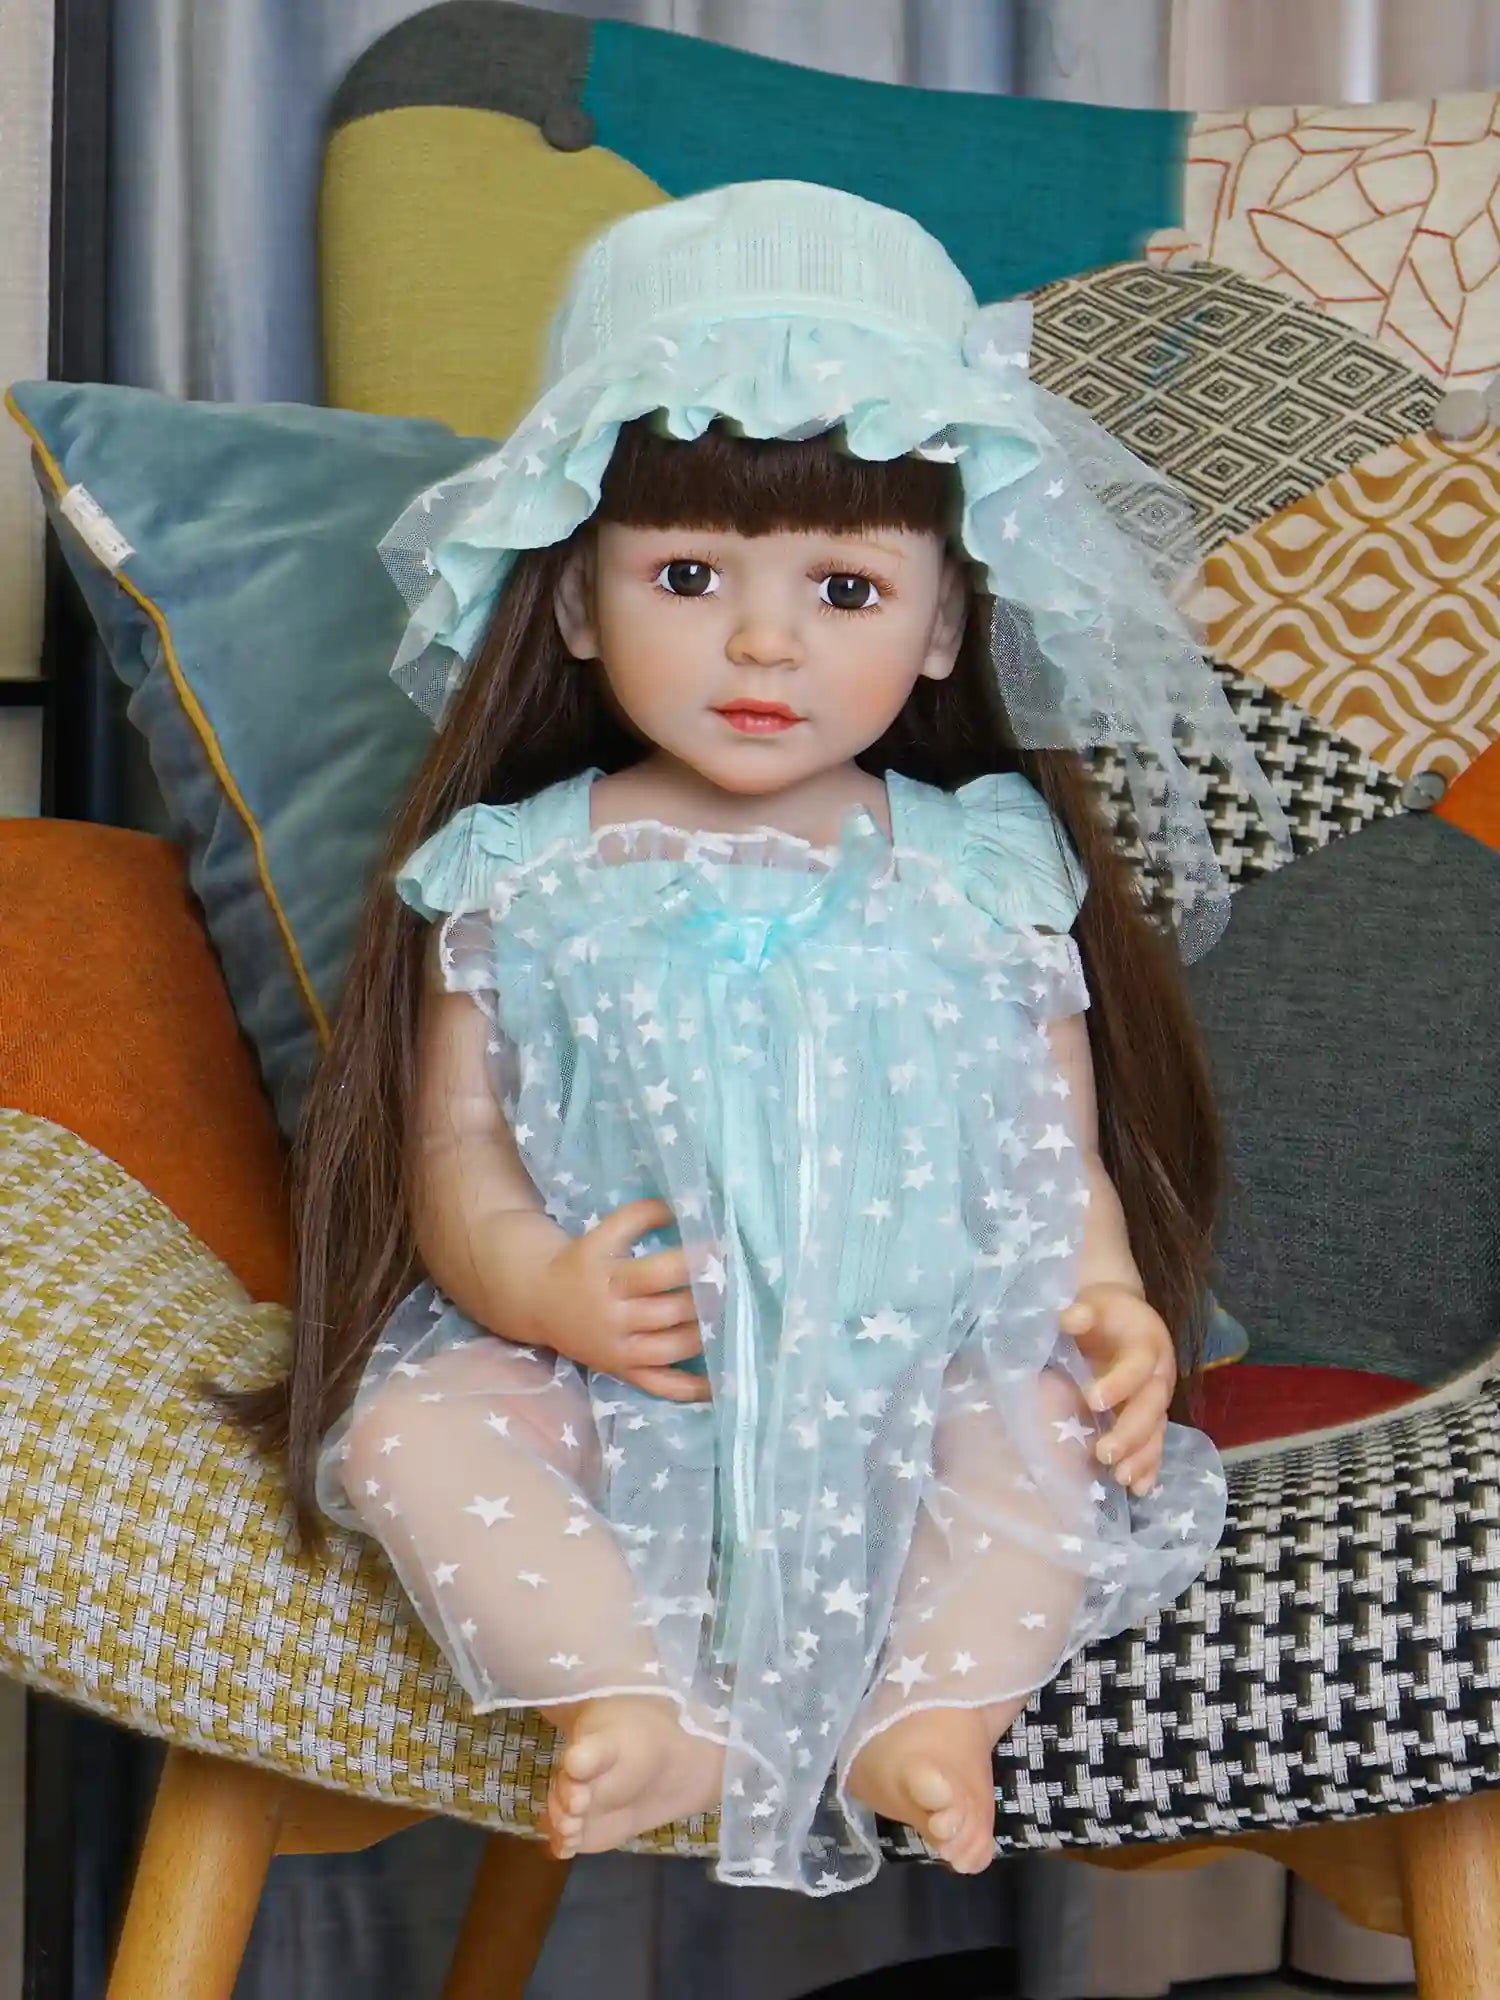 Doll with long brown hair and aqua hat, seated in a star-patterned tulle dress.